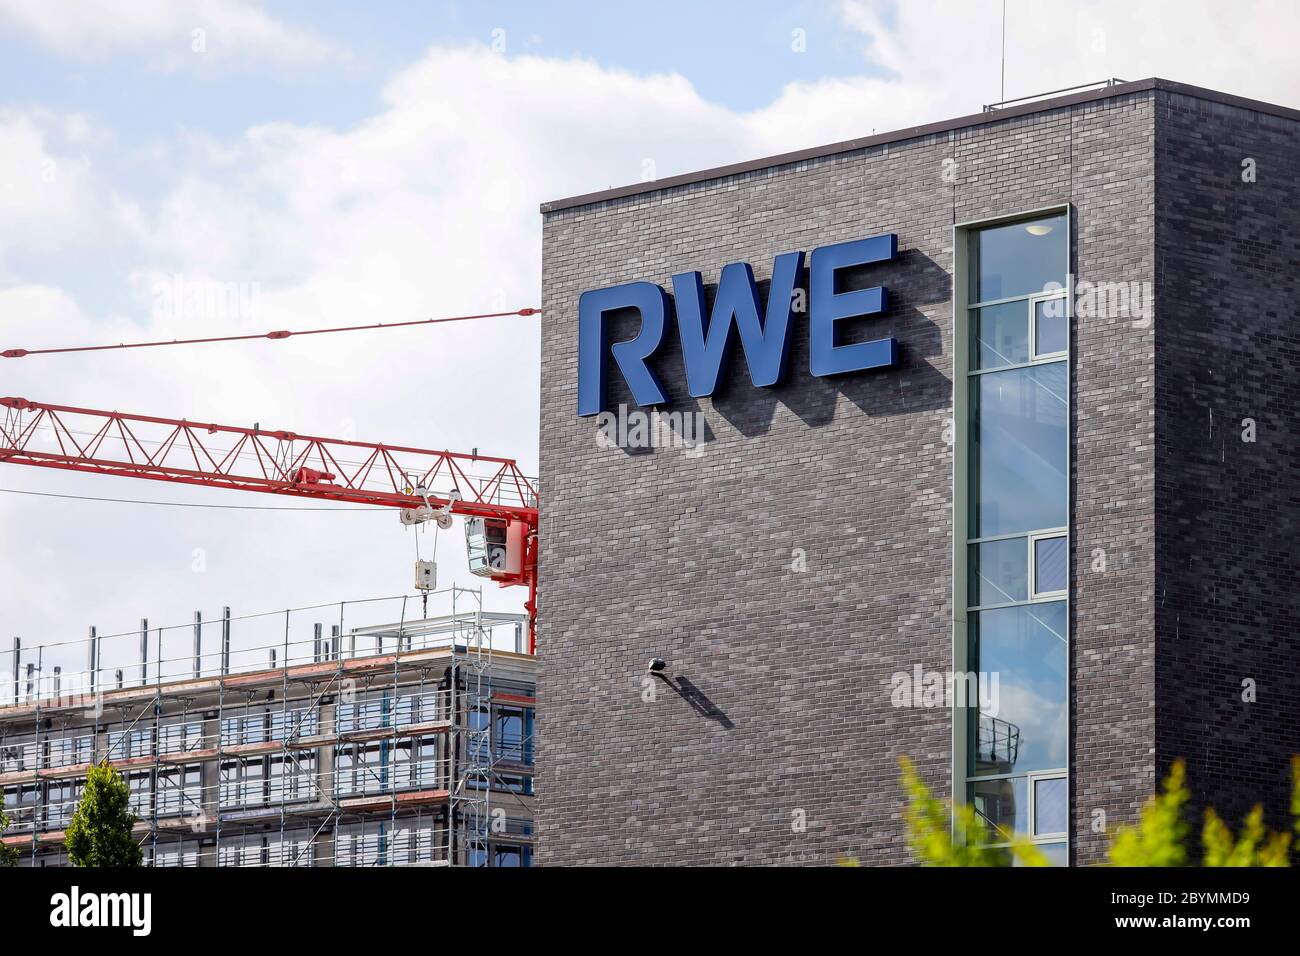 25.05.2020, Essen, North Rhine-Westphalia, Germany - RWE headquarters, new campus buildings for the new RWE headquarters are currently being construct Stock Photo